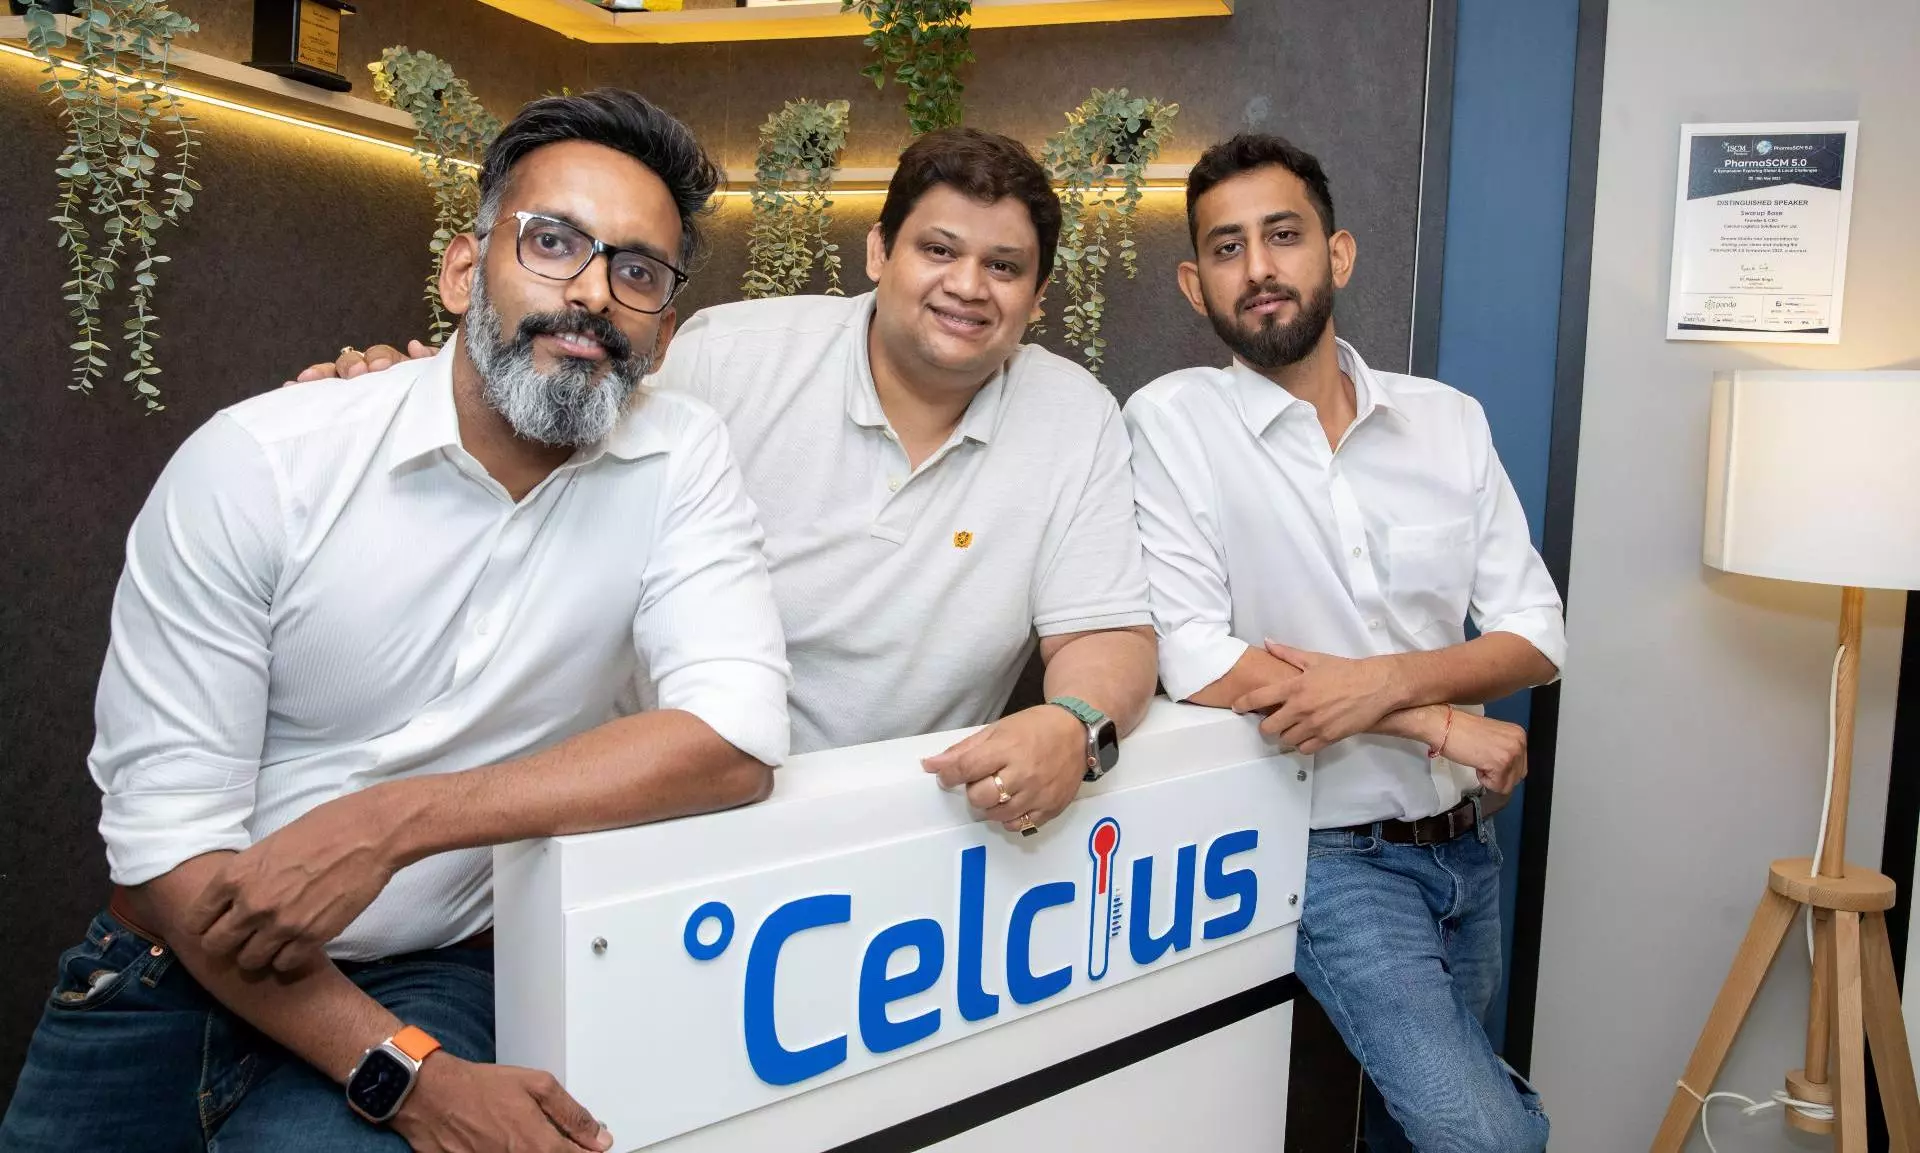 Celcius completes Series A with ₹100 cr funding led by IvyCap Ventures